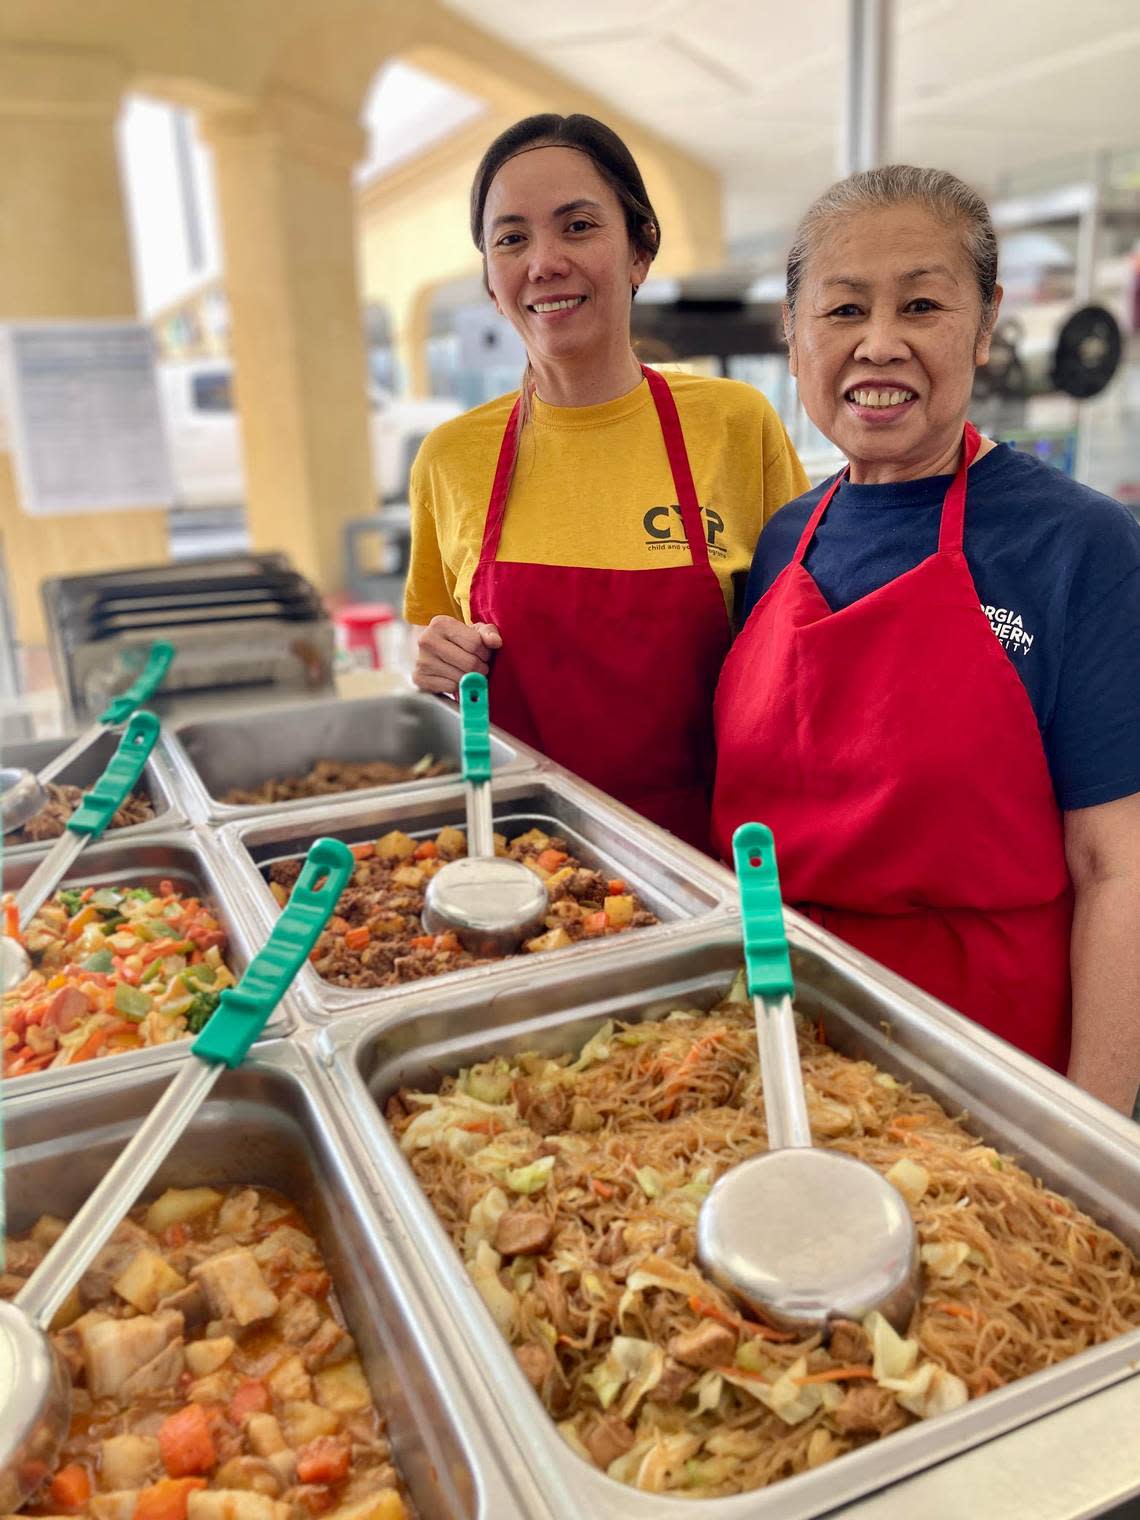 From left to right, Lorena Ferguson, owner, and Delia Tropel, at Lor’s Philippine Cuisine in Warner Robins.